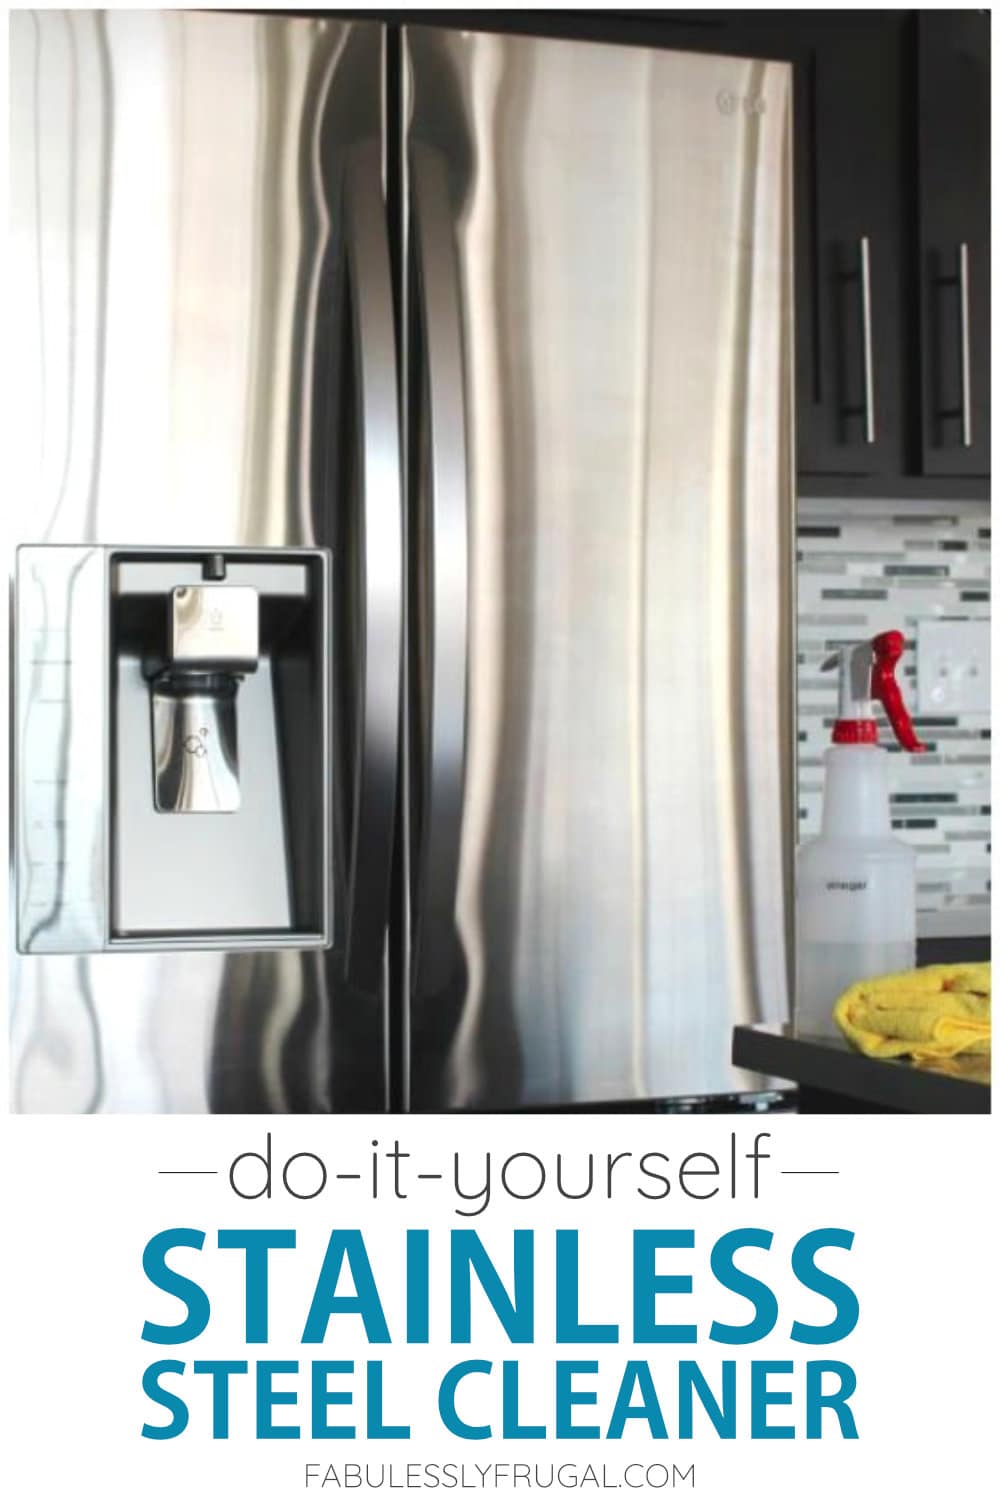 Do-it-yourself stainless steel cleaner recipe